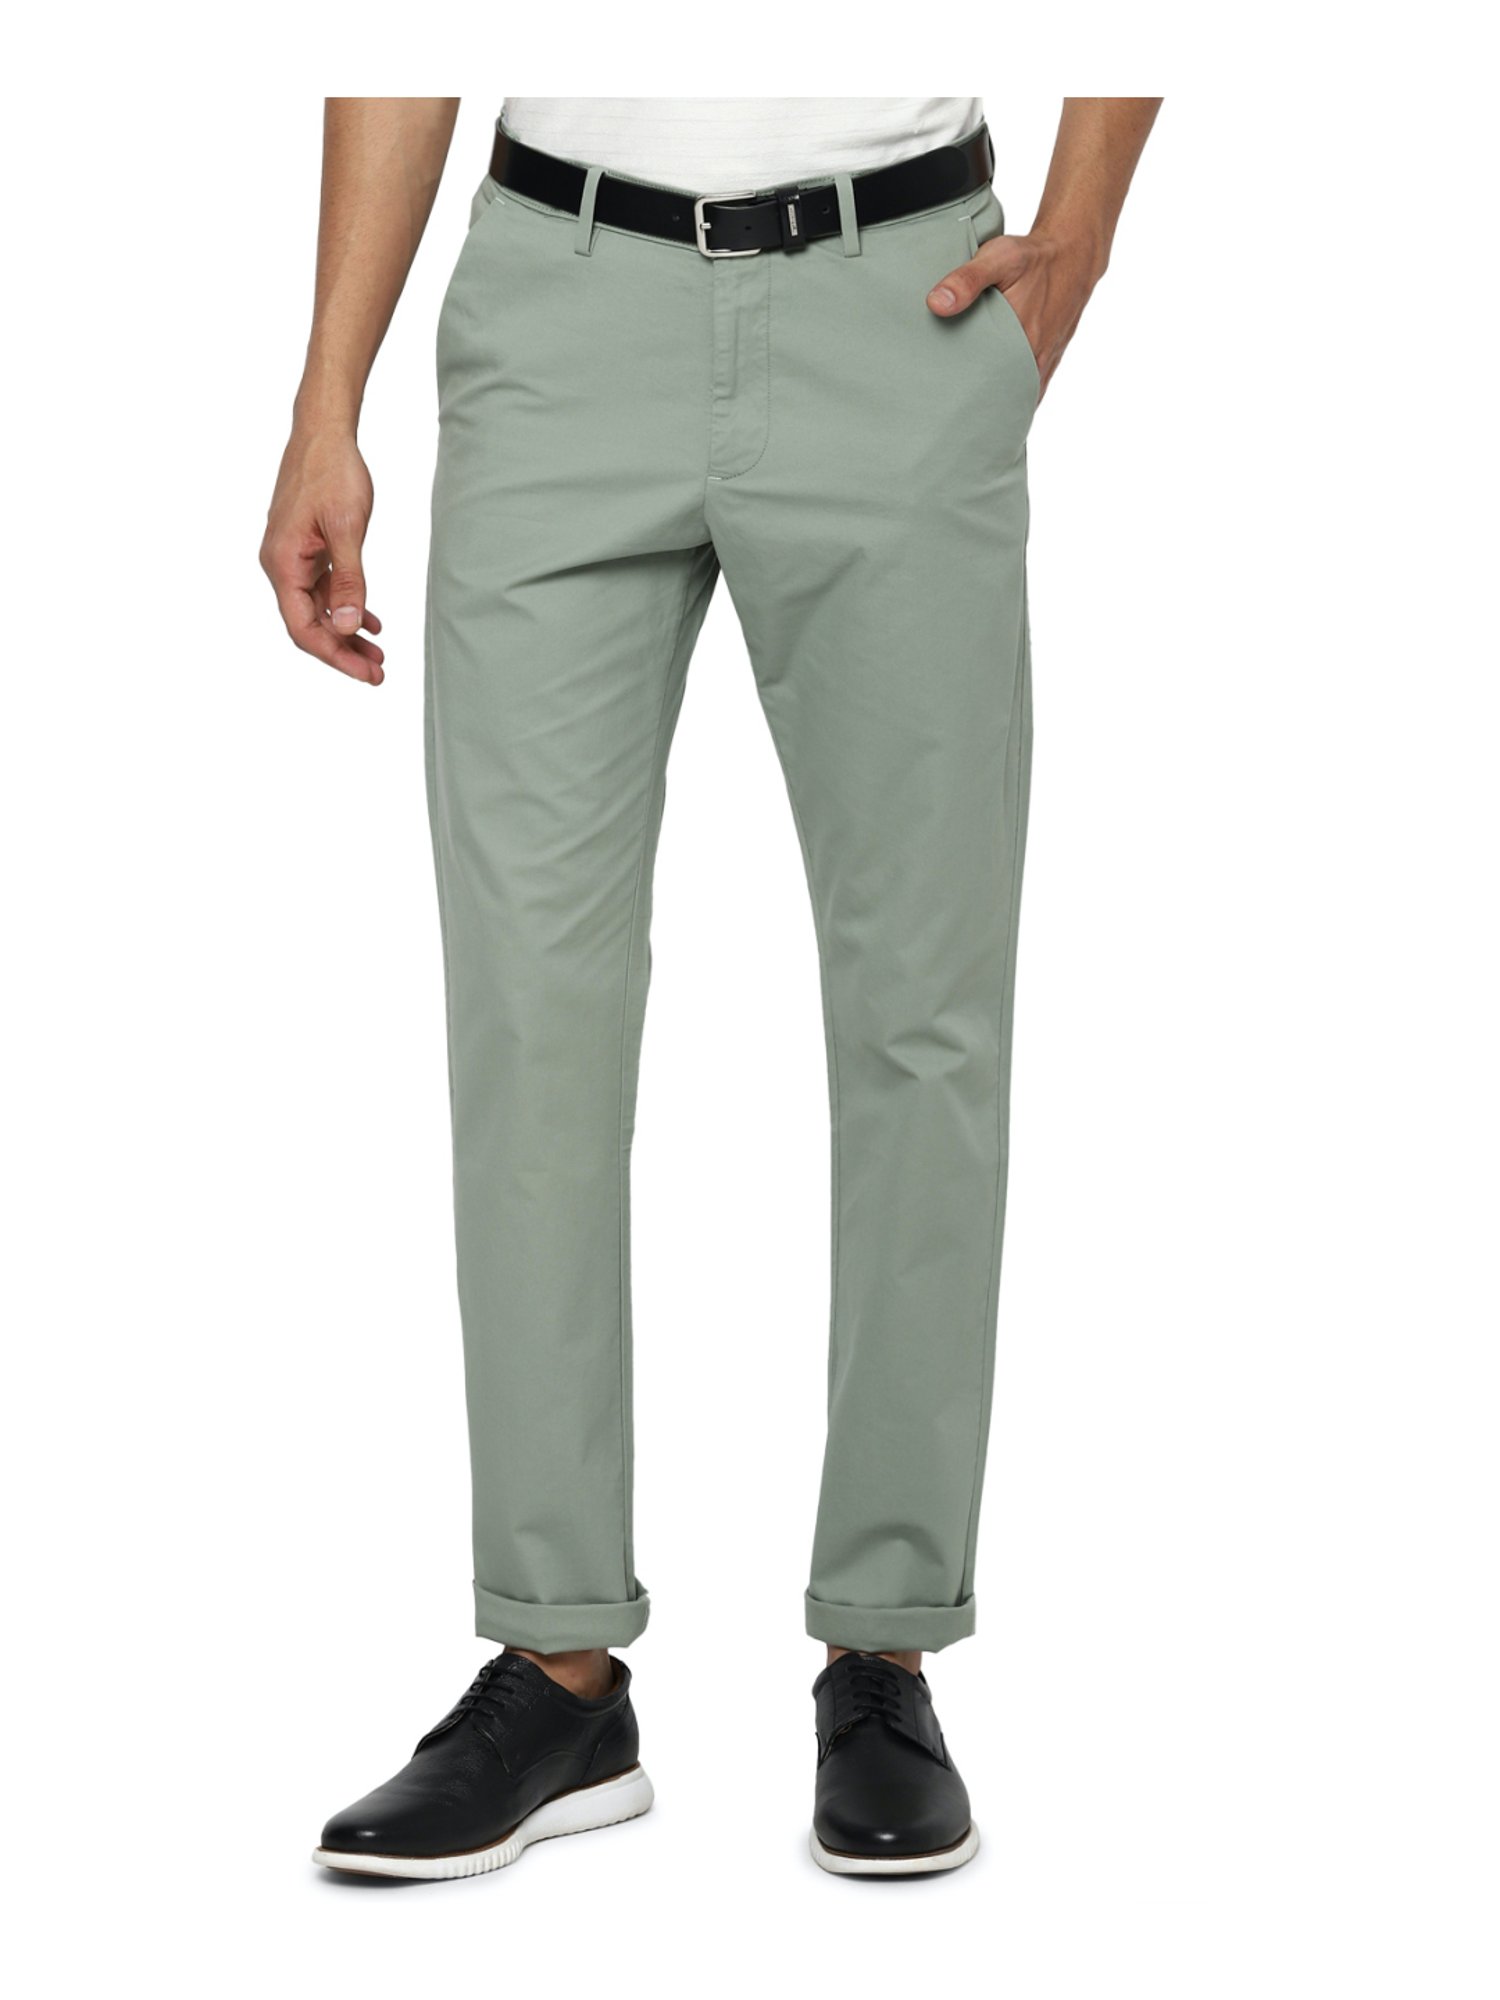 Buy Allen Solly Olive Green Regular Fit Flat Front Trousers for Mens Online   Tata CLiQ